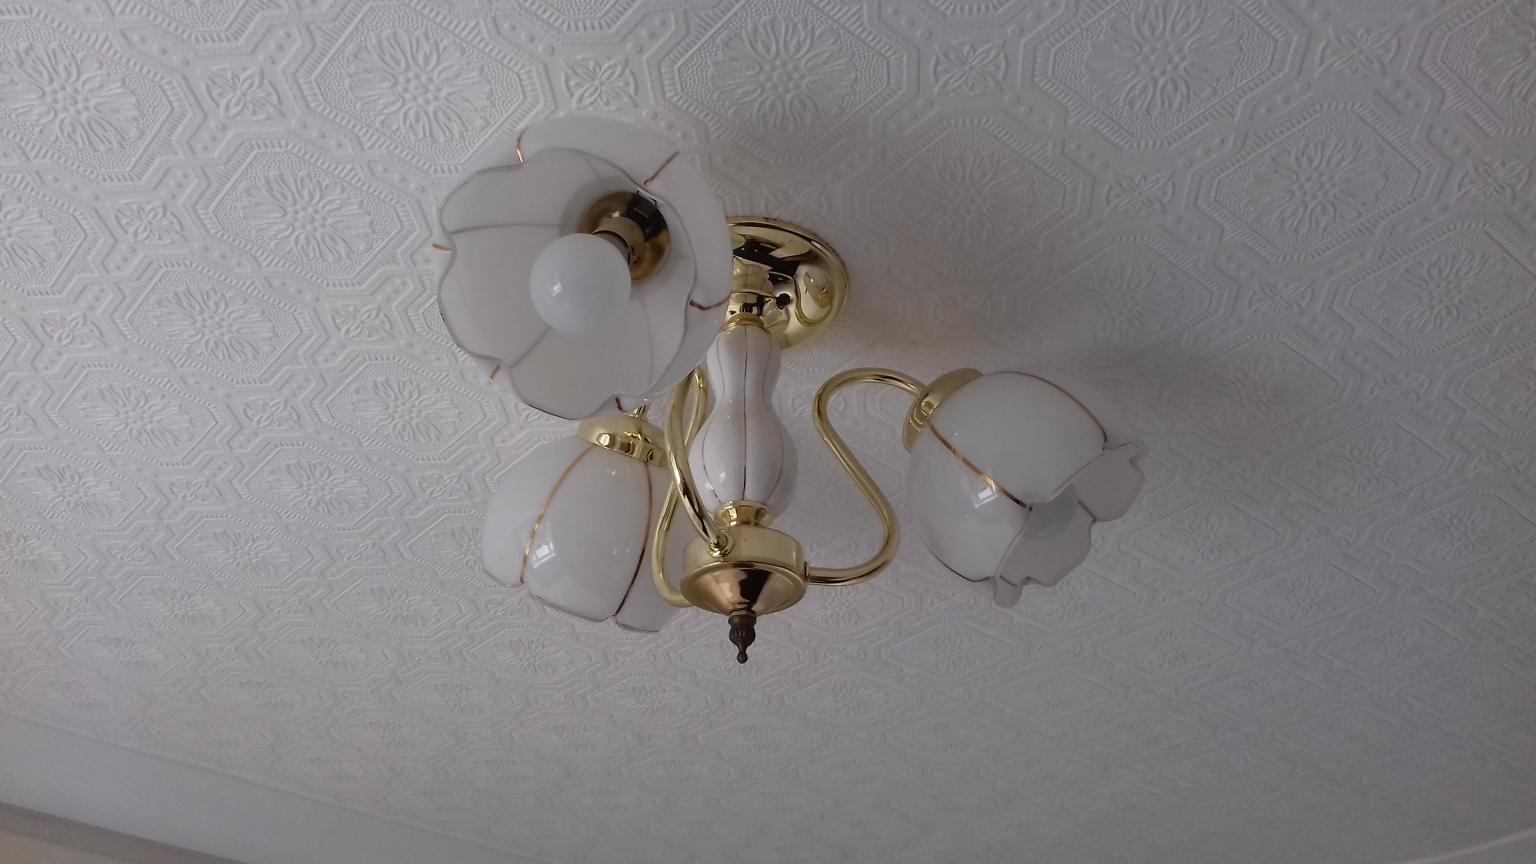 Matching Ceiling Wall Lights In Tf2 Oakengates For 8 00